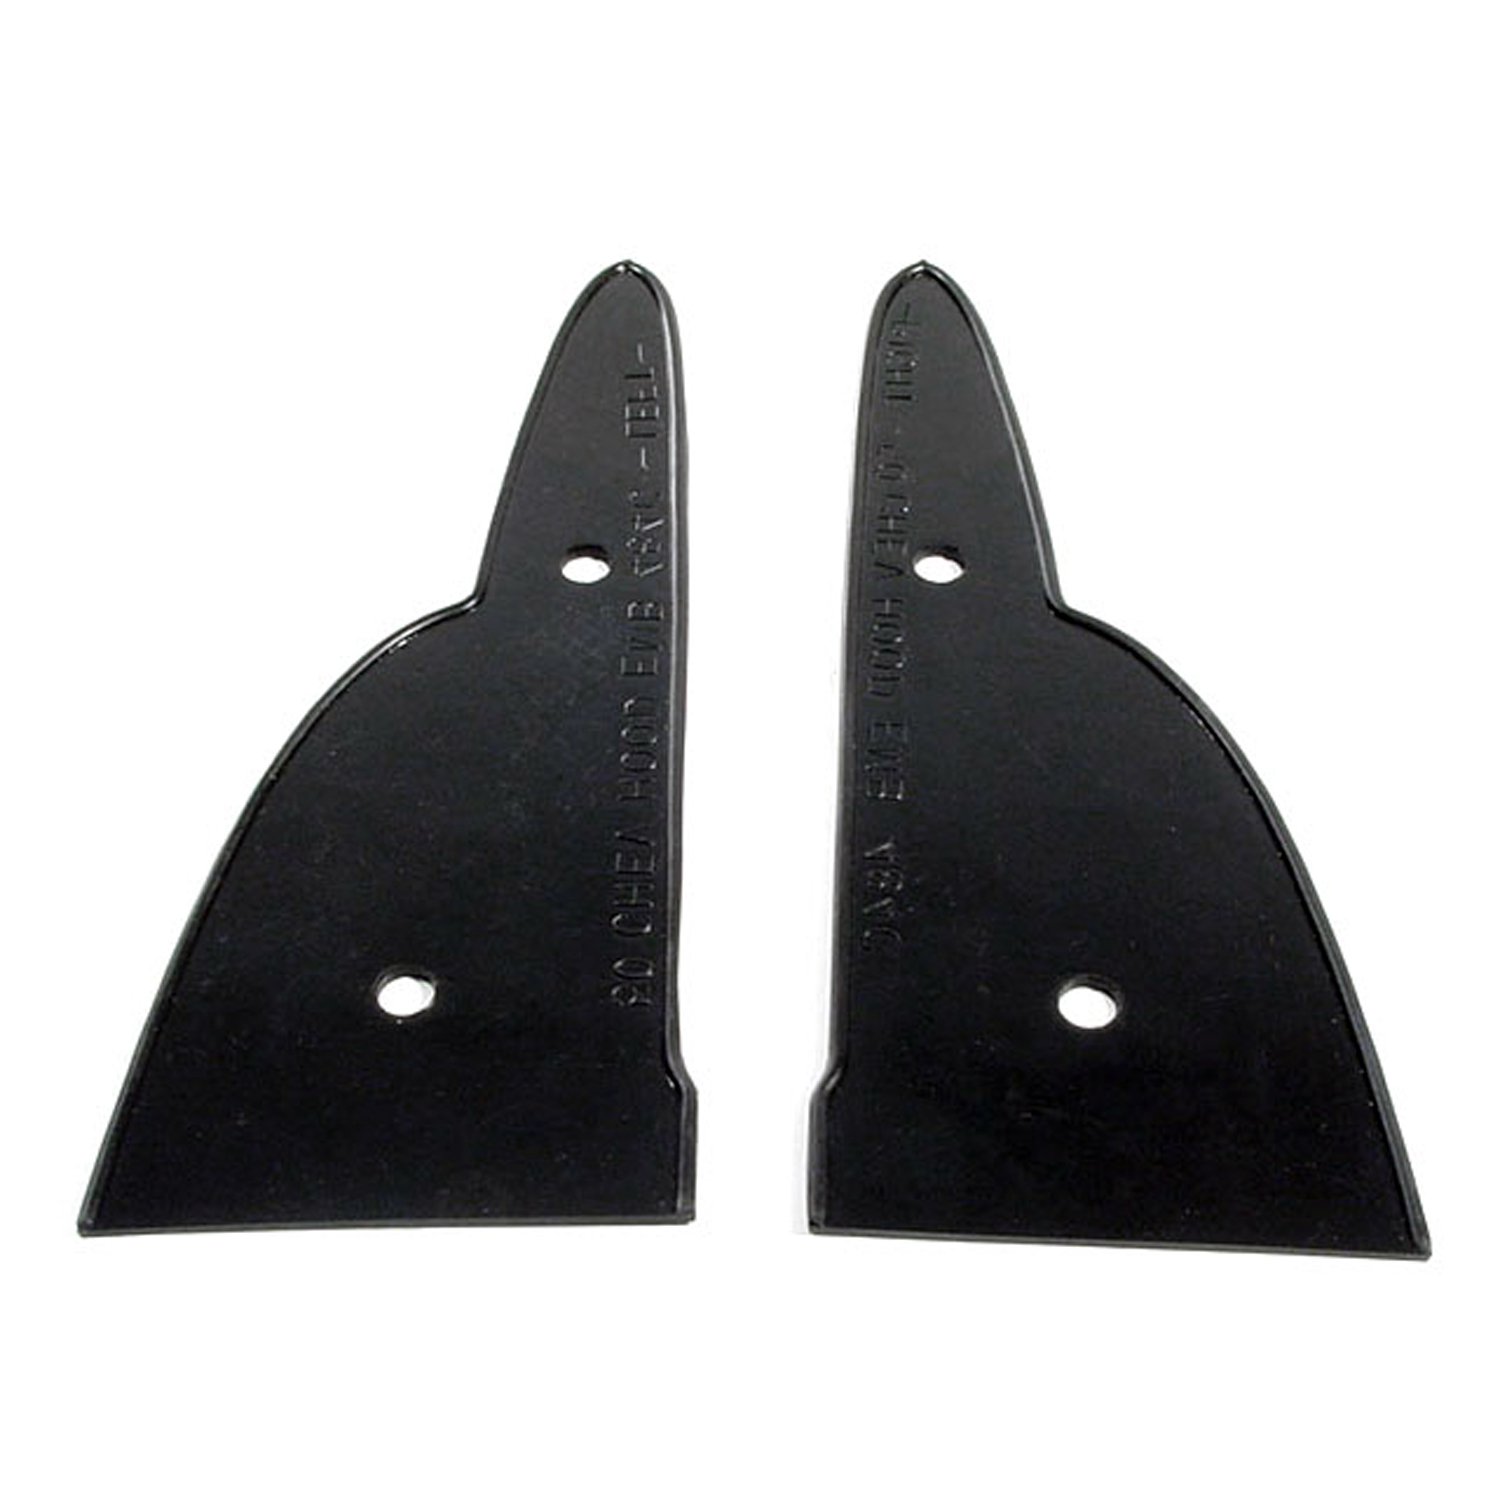 1950 Chevrolet Styleline Deluxe Hood emblem pad. Single item comprises two pieces. 3-1/8 in-MP 484-C